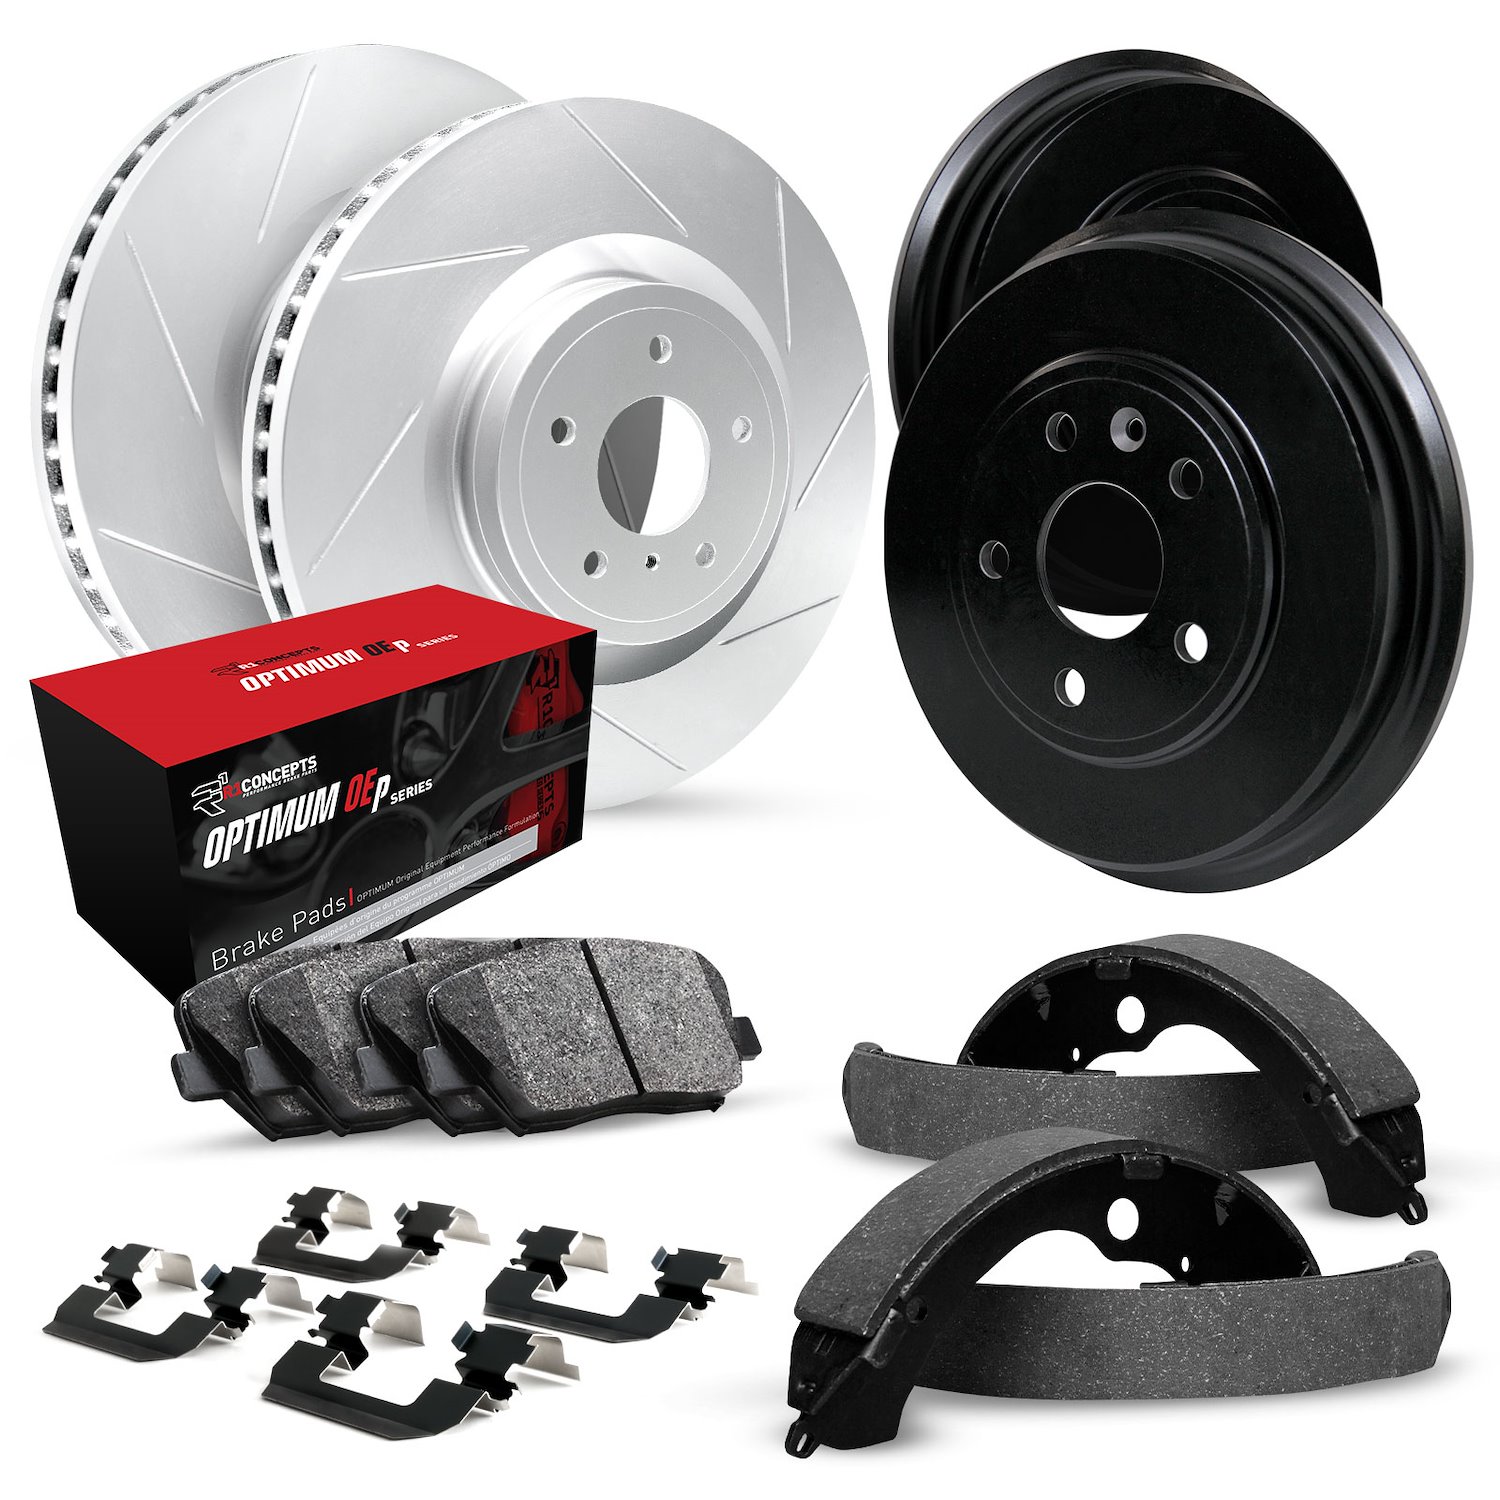 GEO-Carbon Slotted Brake Rotor & Drum Set w/Optimum OE Pads, Shoes, & Hardware, 1986-1990 GM, Position: Front & Rear